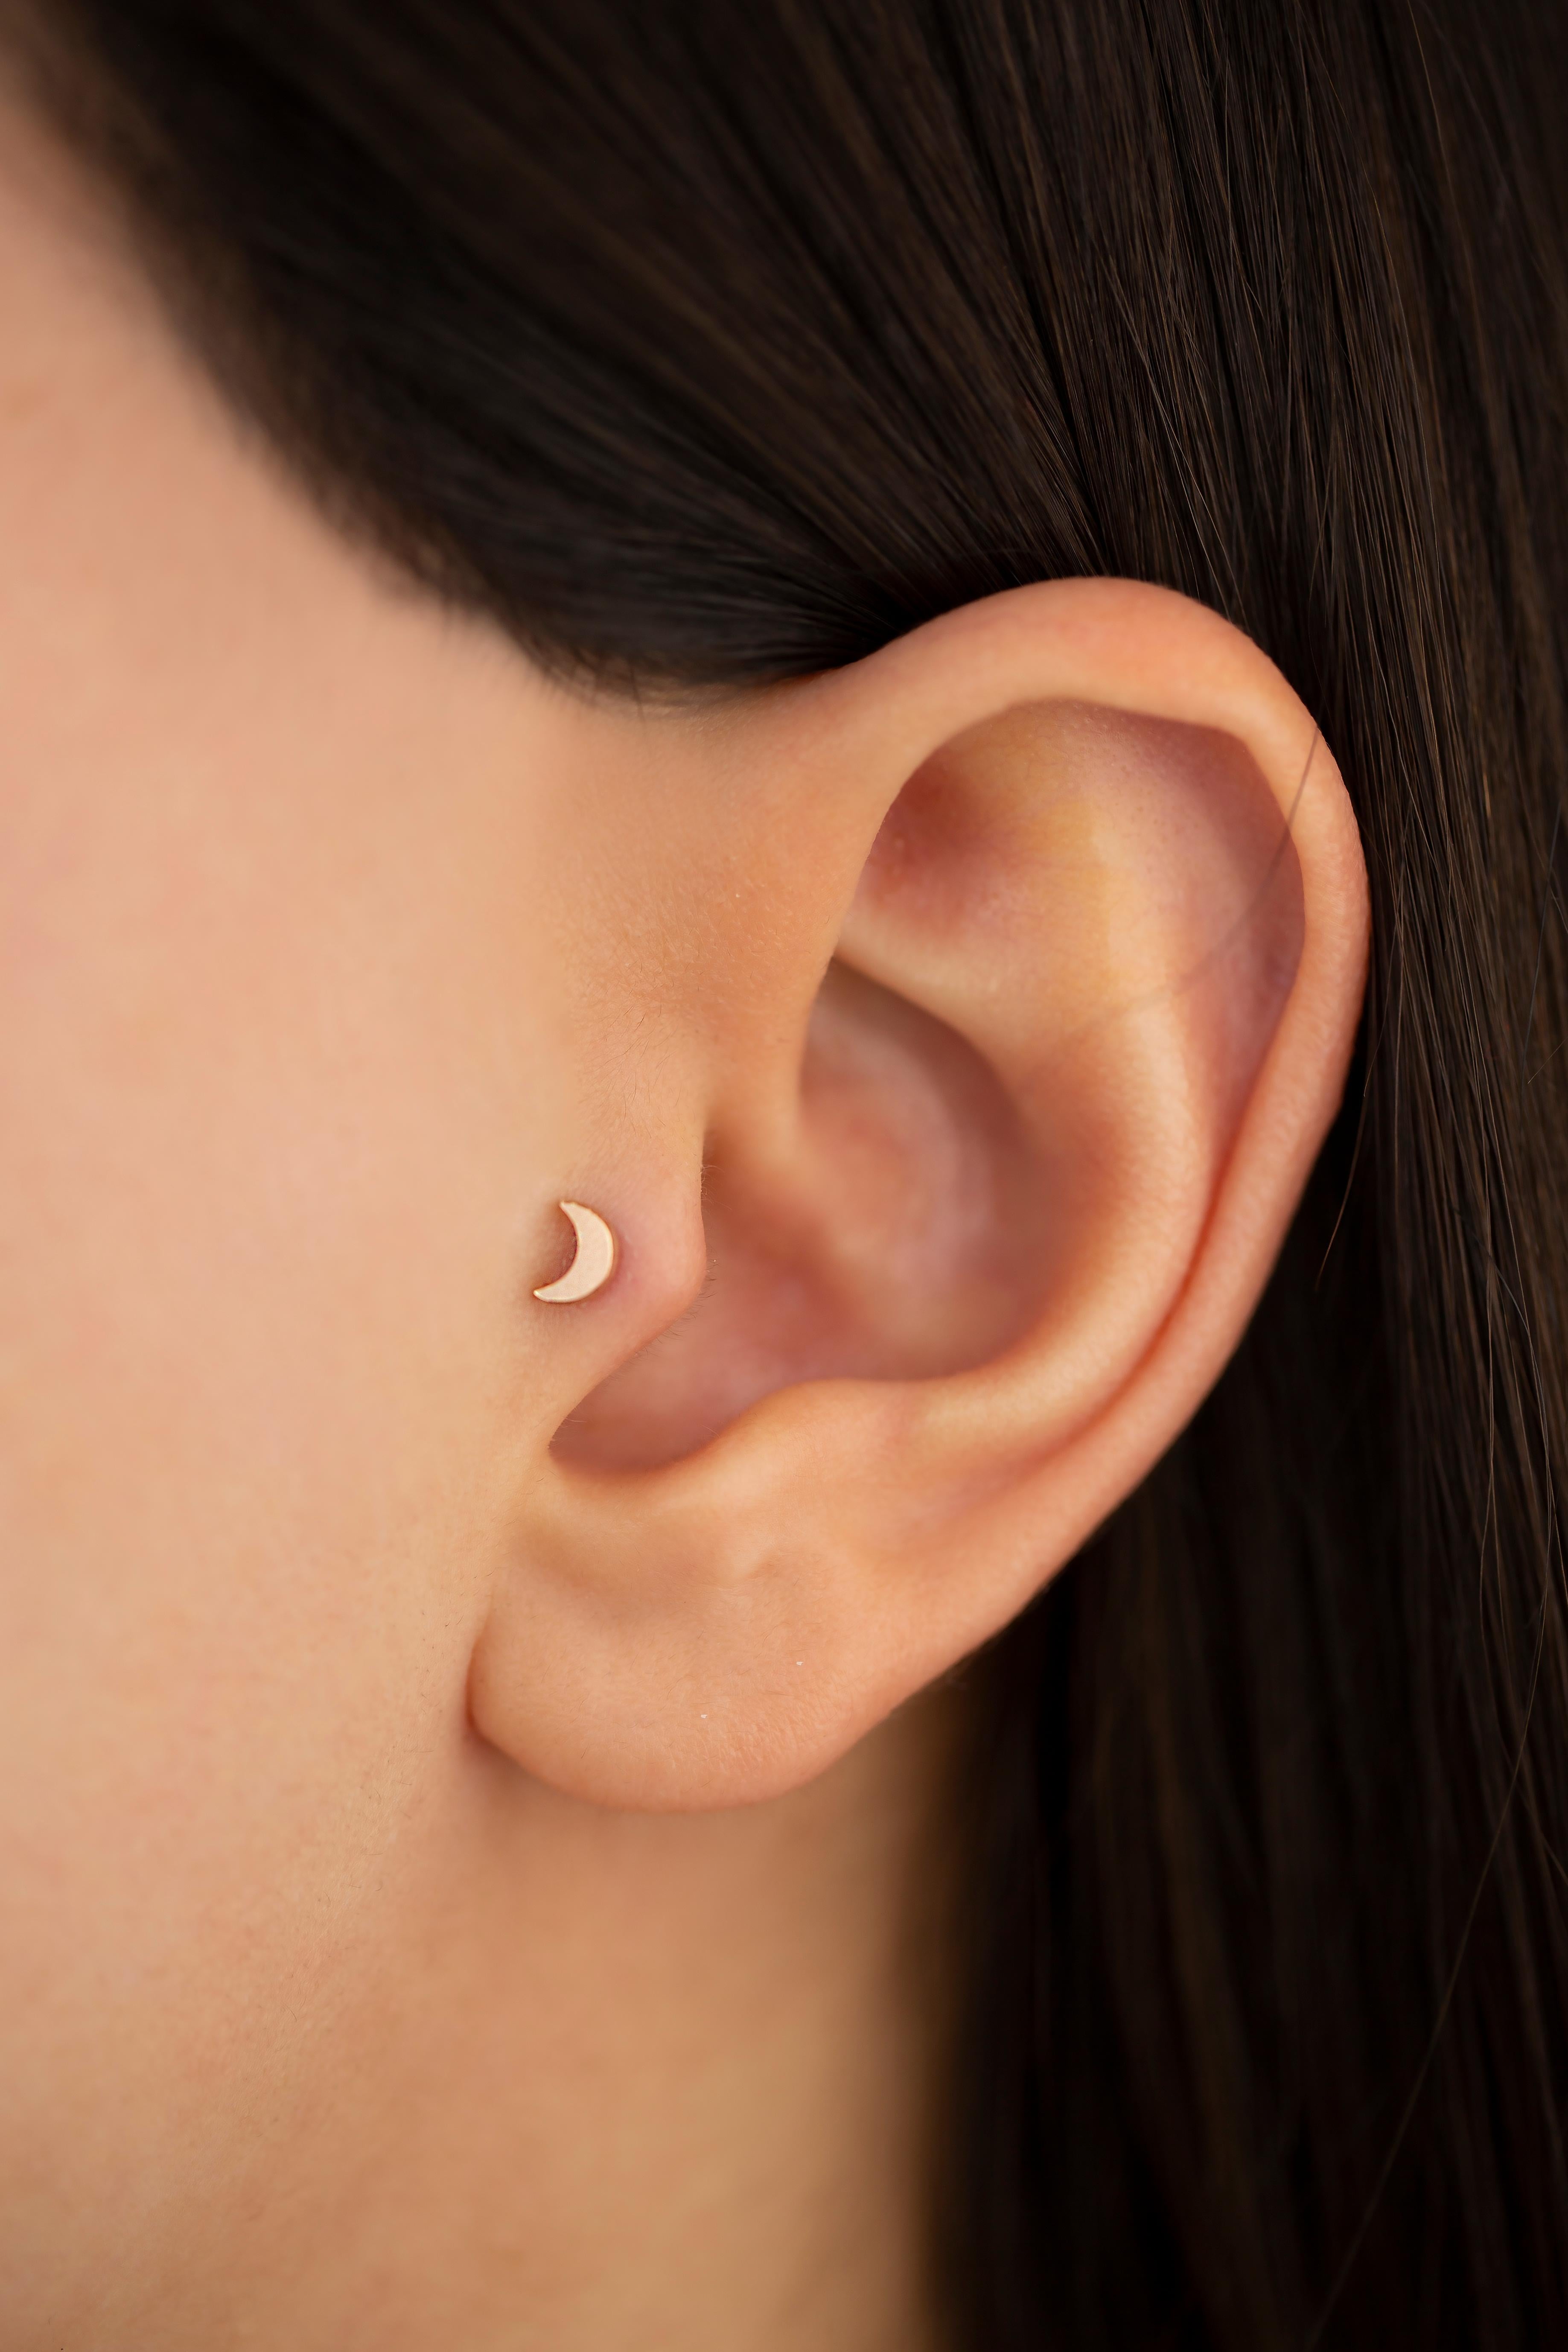 14K Gold Crescent Piercing, Gold Half Moon Earring

You can use the piercing as an earring too! Also this piercing is suitable for tragus, nose, helix, lobe, flat, medusa, monreo, labret and stud.

This piercing was made with quality materials and